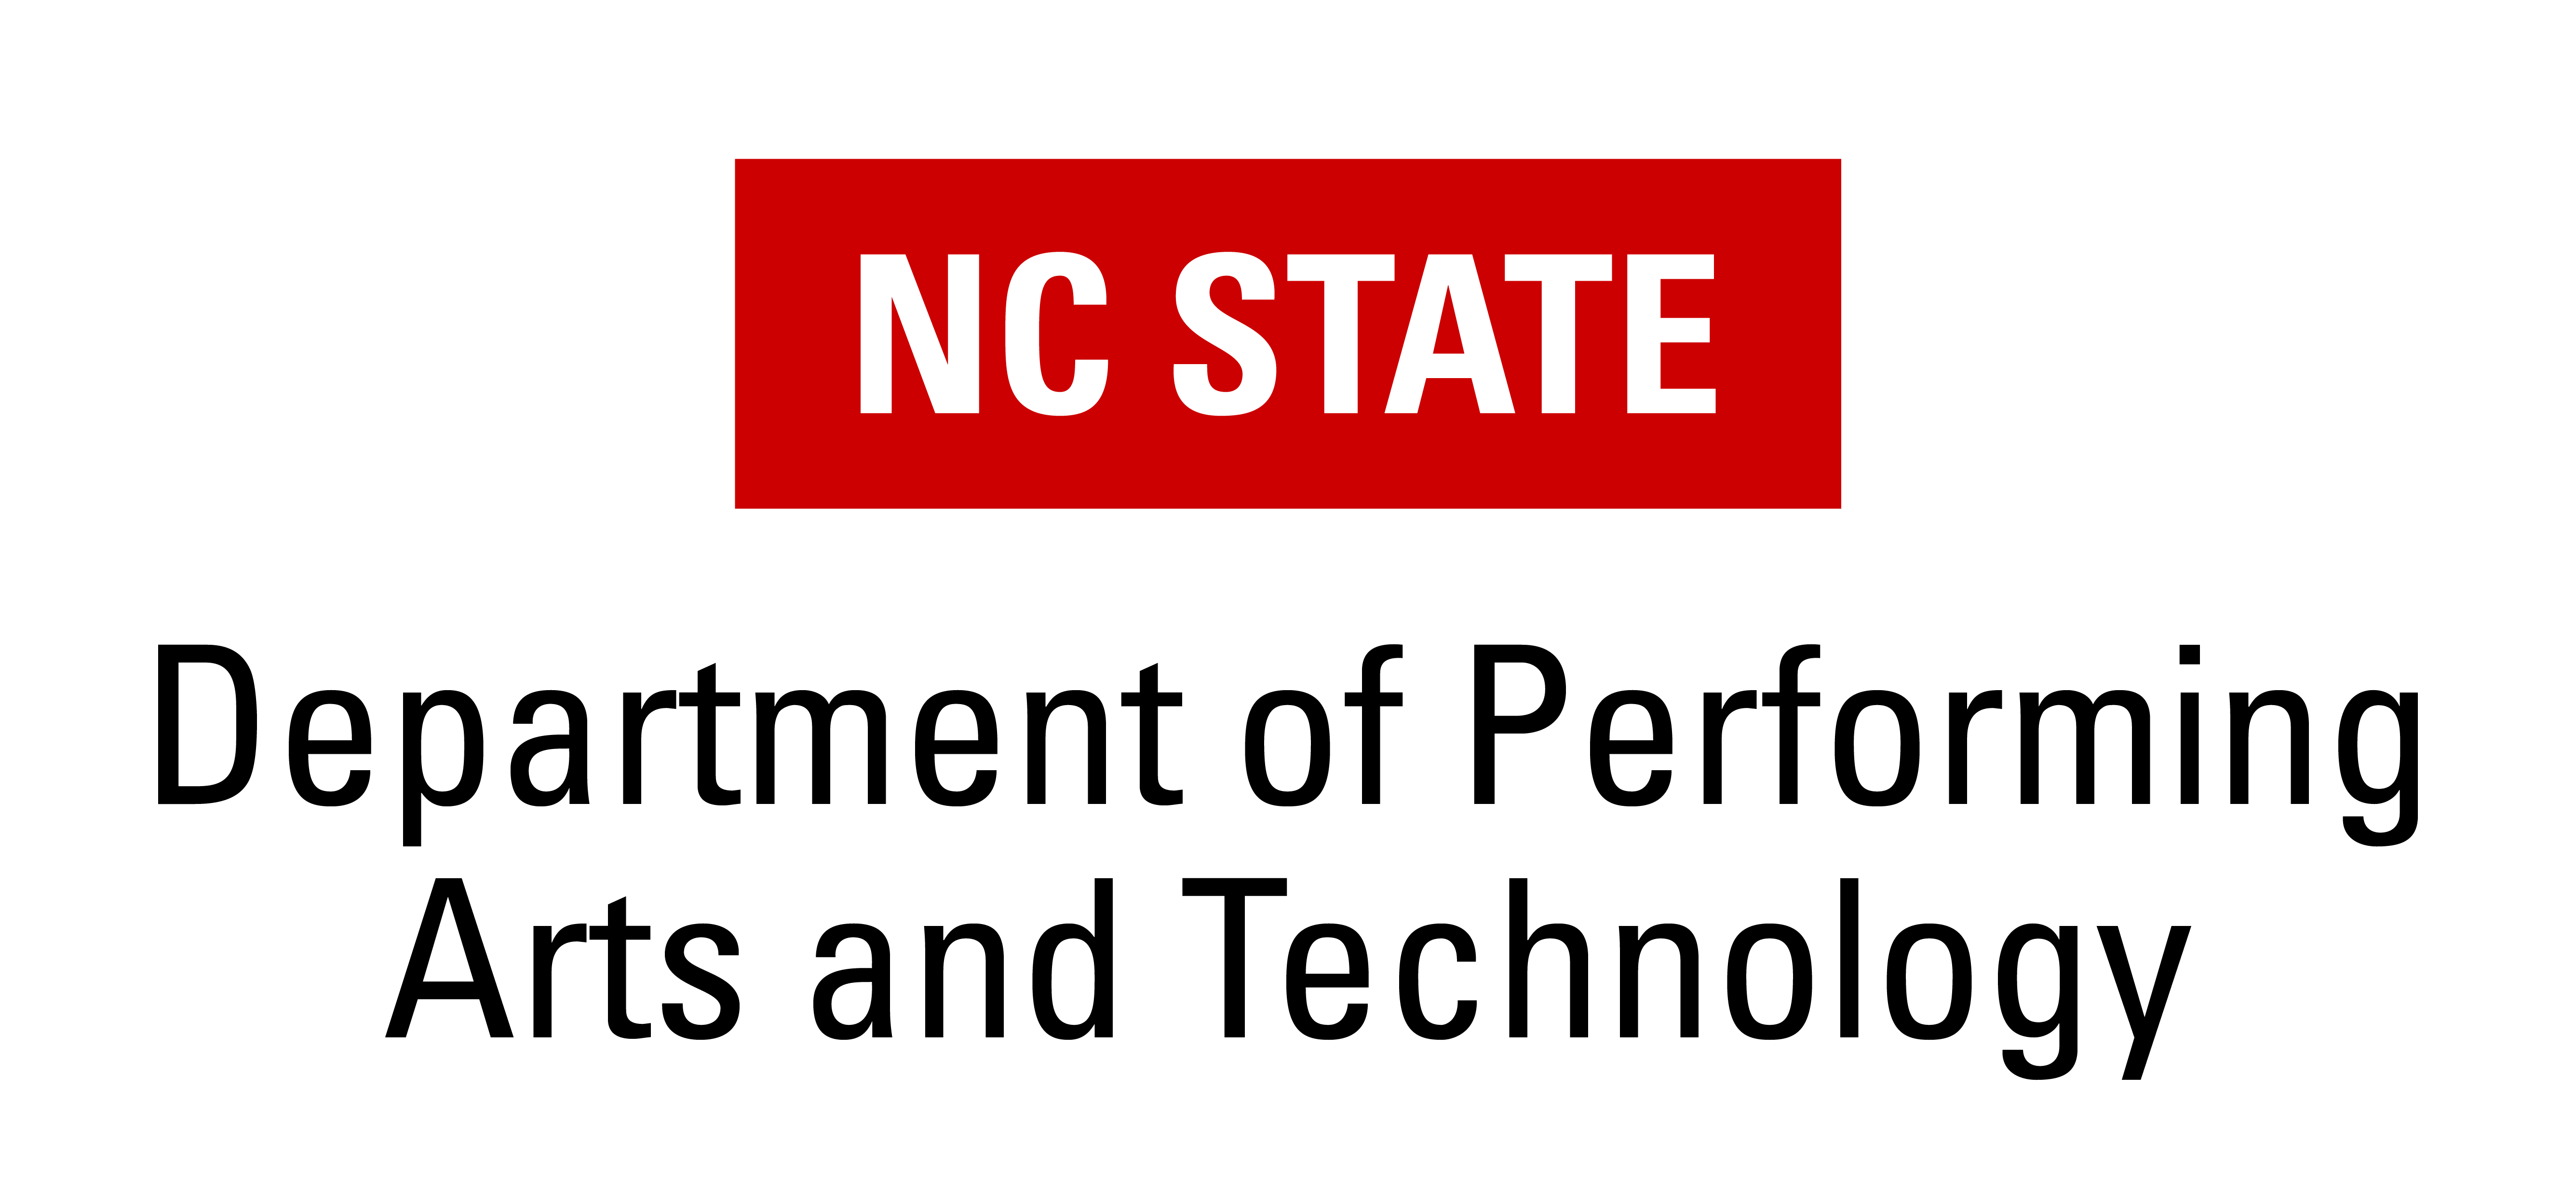 NC State Department of Performing Arts and Technology